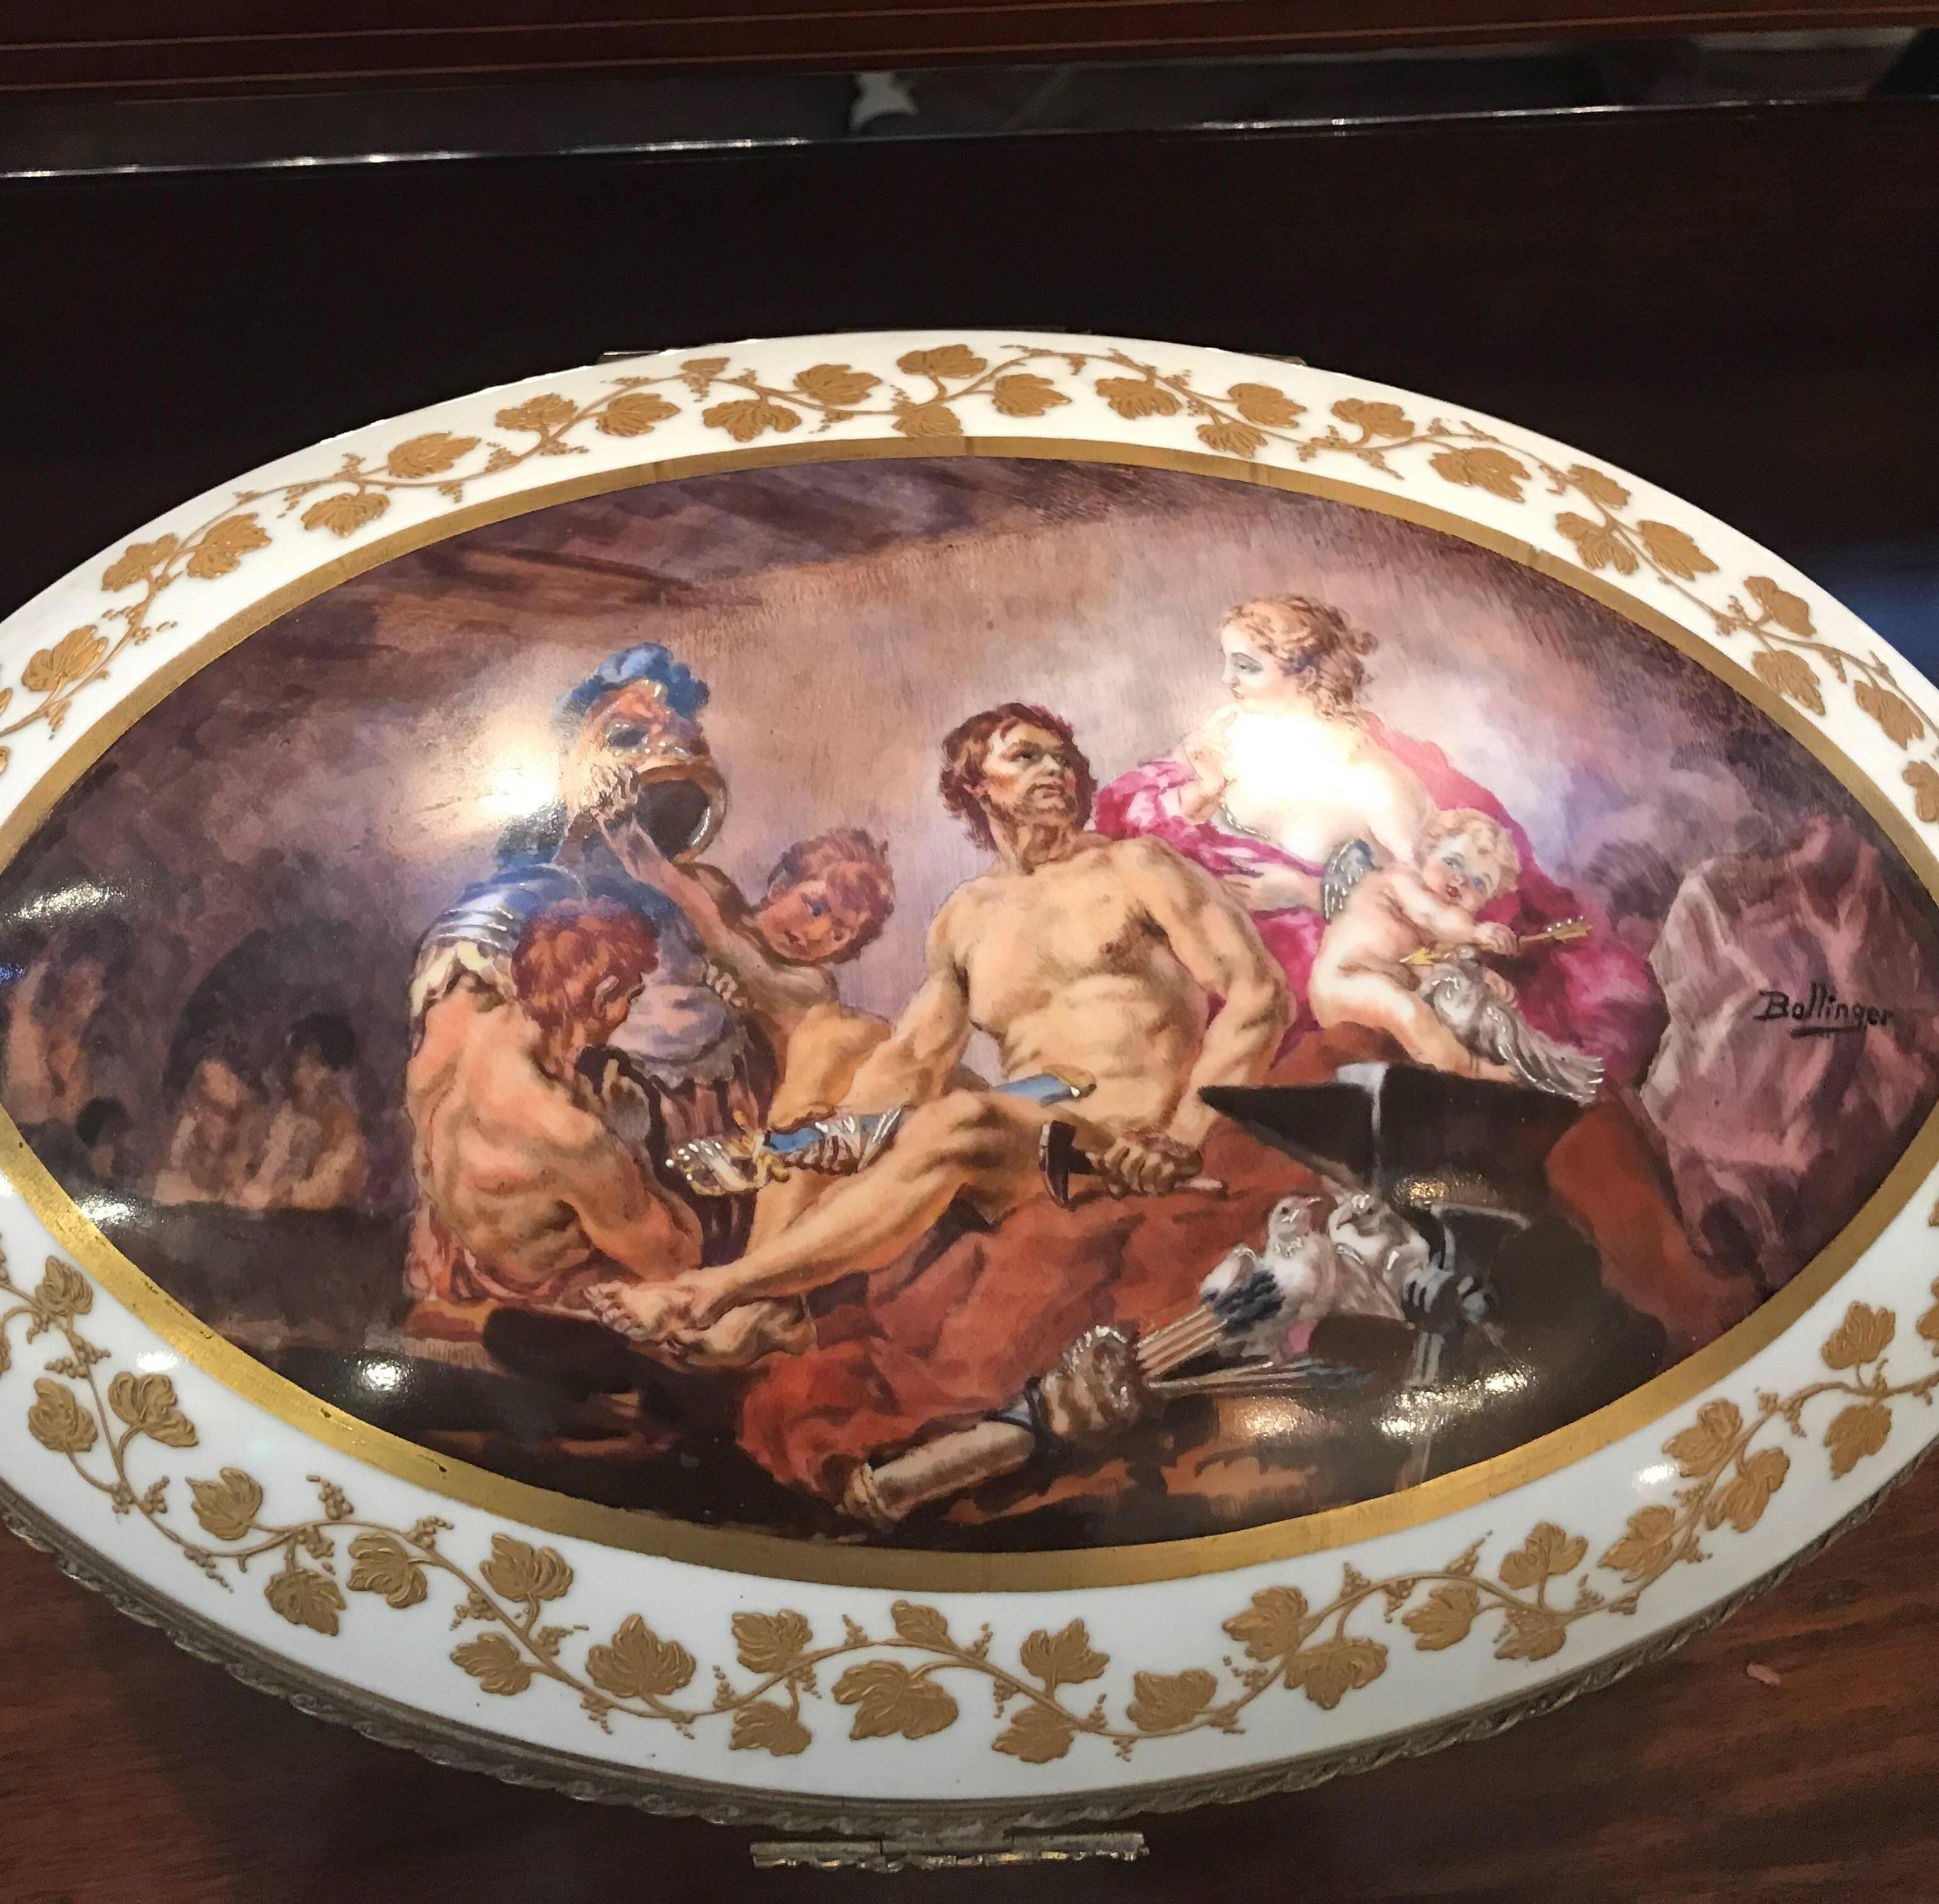 Beautiful antique French porcelain table box with gilt hinged mount. The allegorical painting on top artist signed Ballinger. The interior and along the outside is a raised impasto gilt leaf and vine decoration. On the interior lid is a love poem